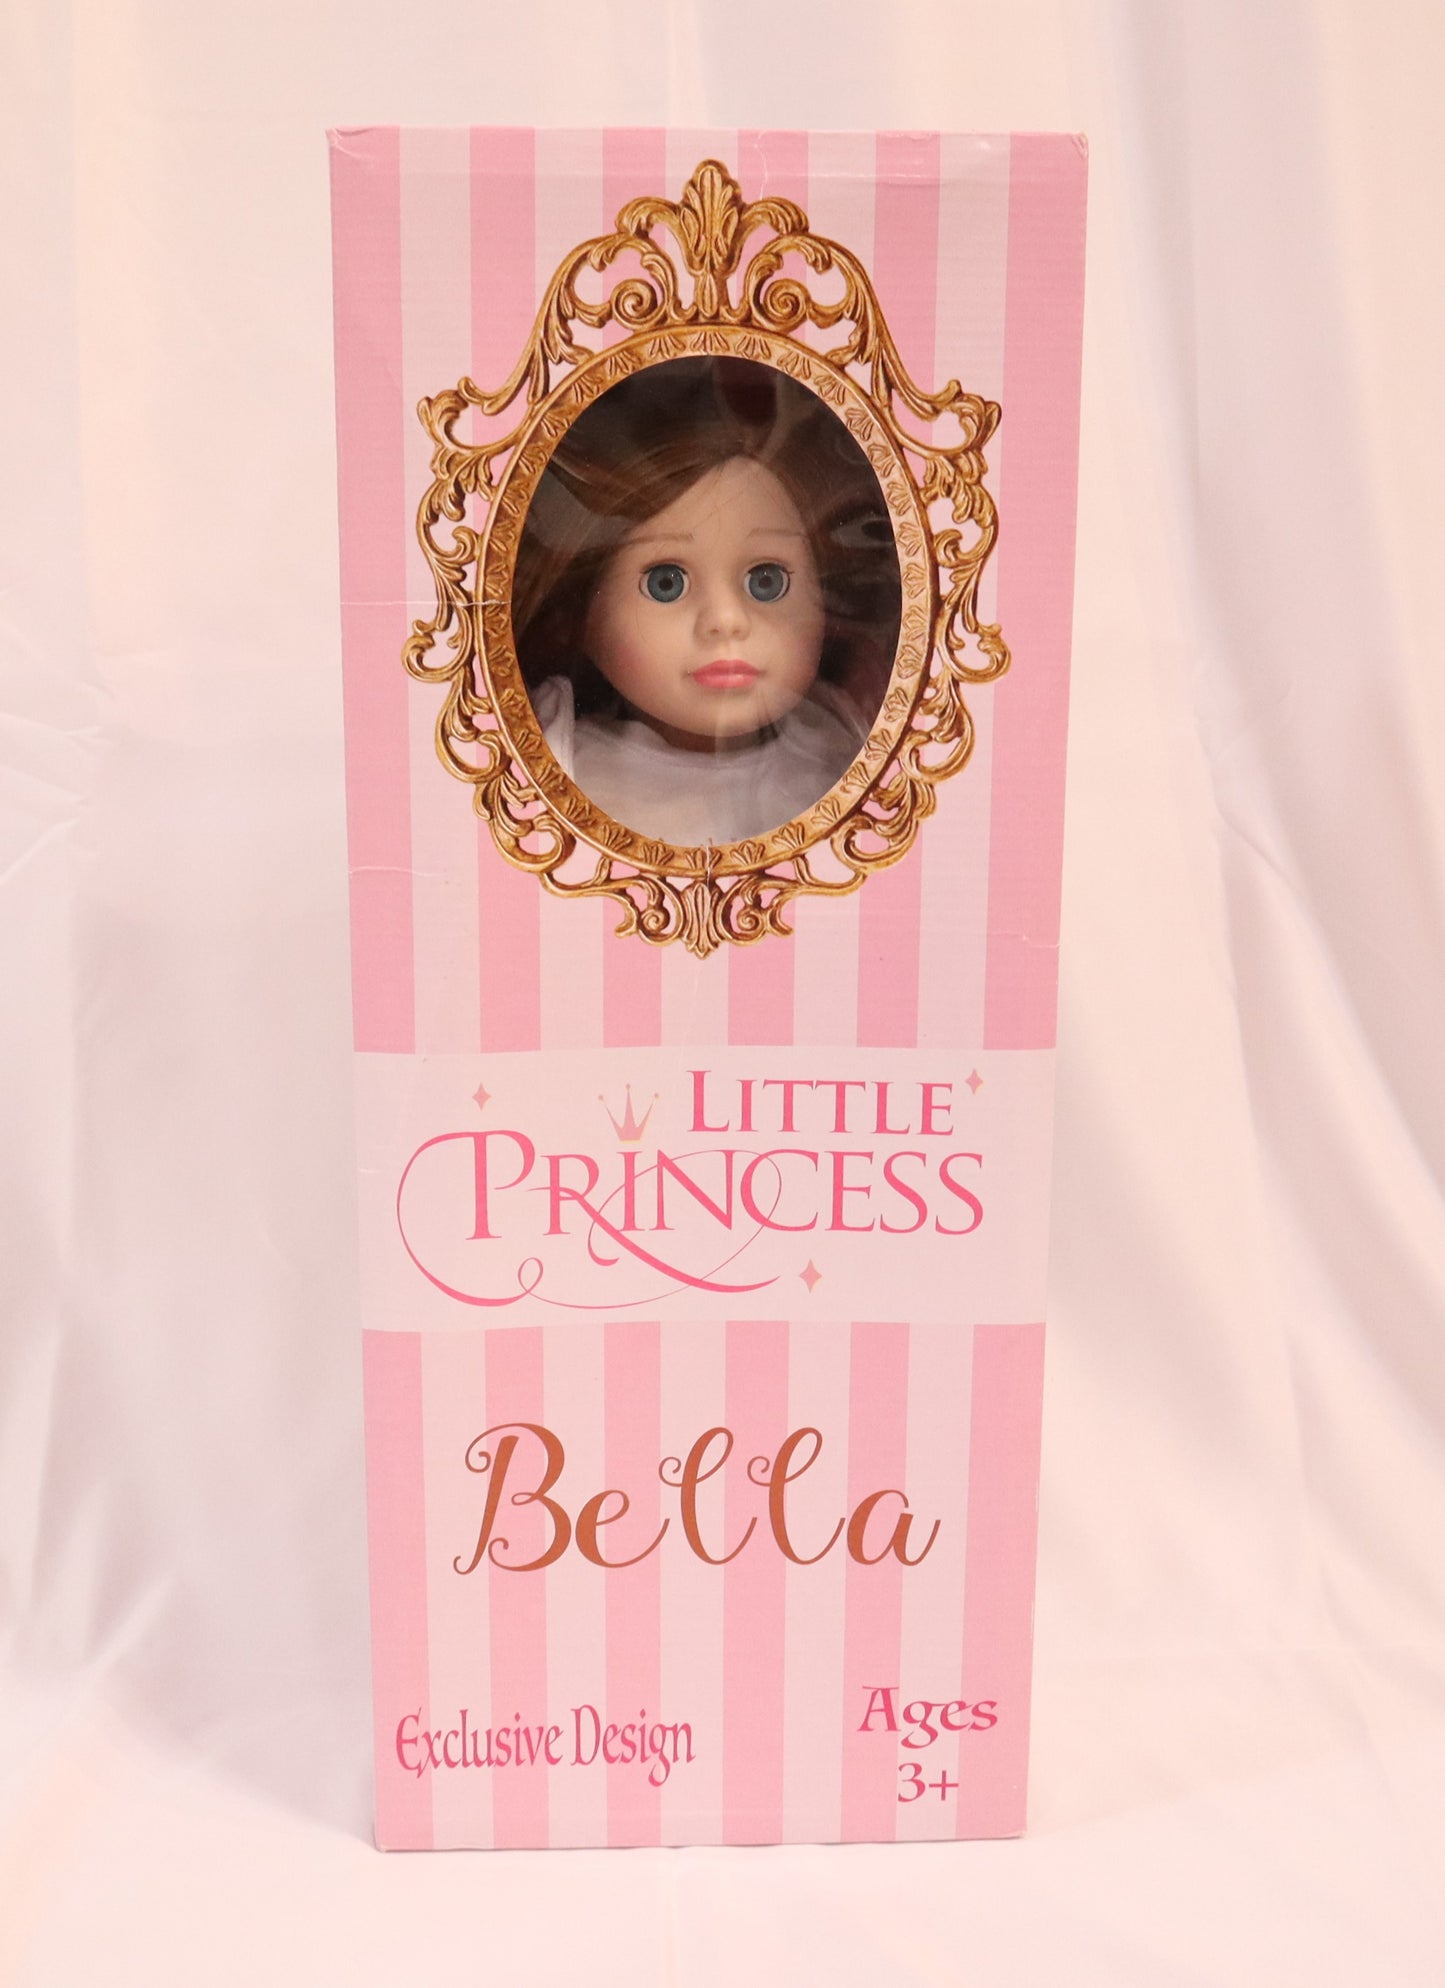 AMERICAN HOLIDAY 18" DOLL "MY LITTLE PRINCESS" Limited Design, BRAND NEW